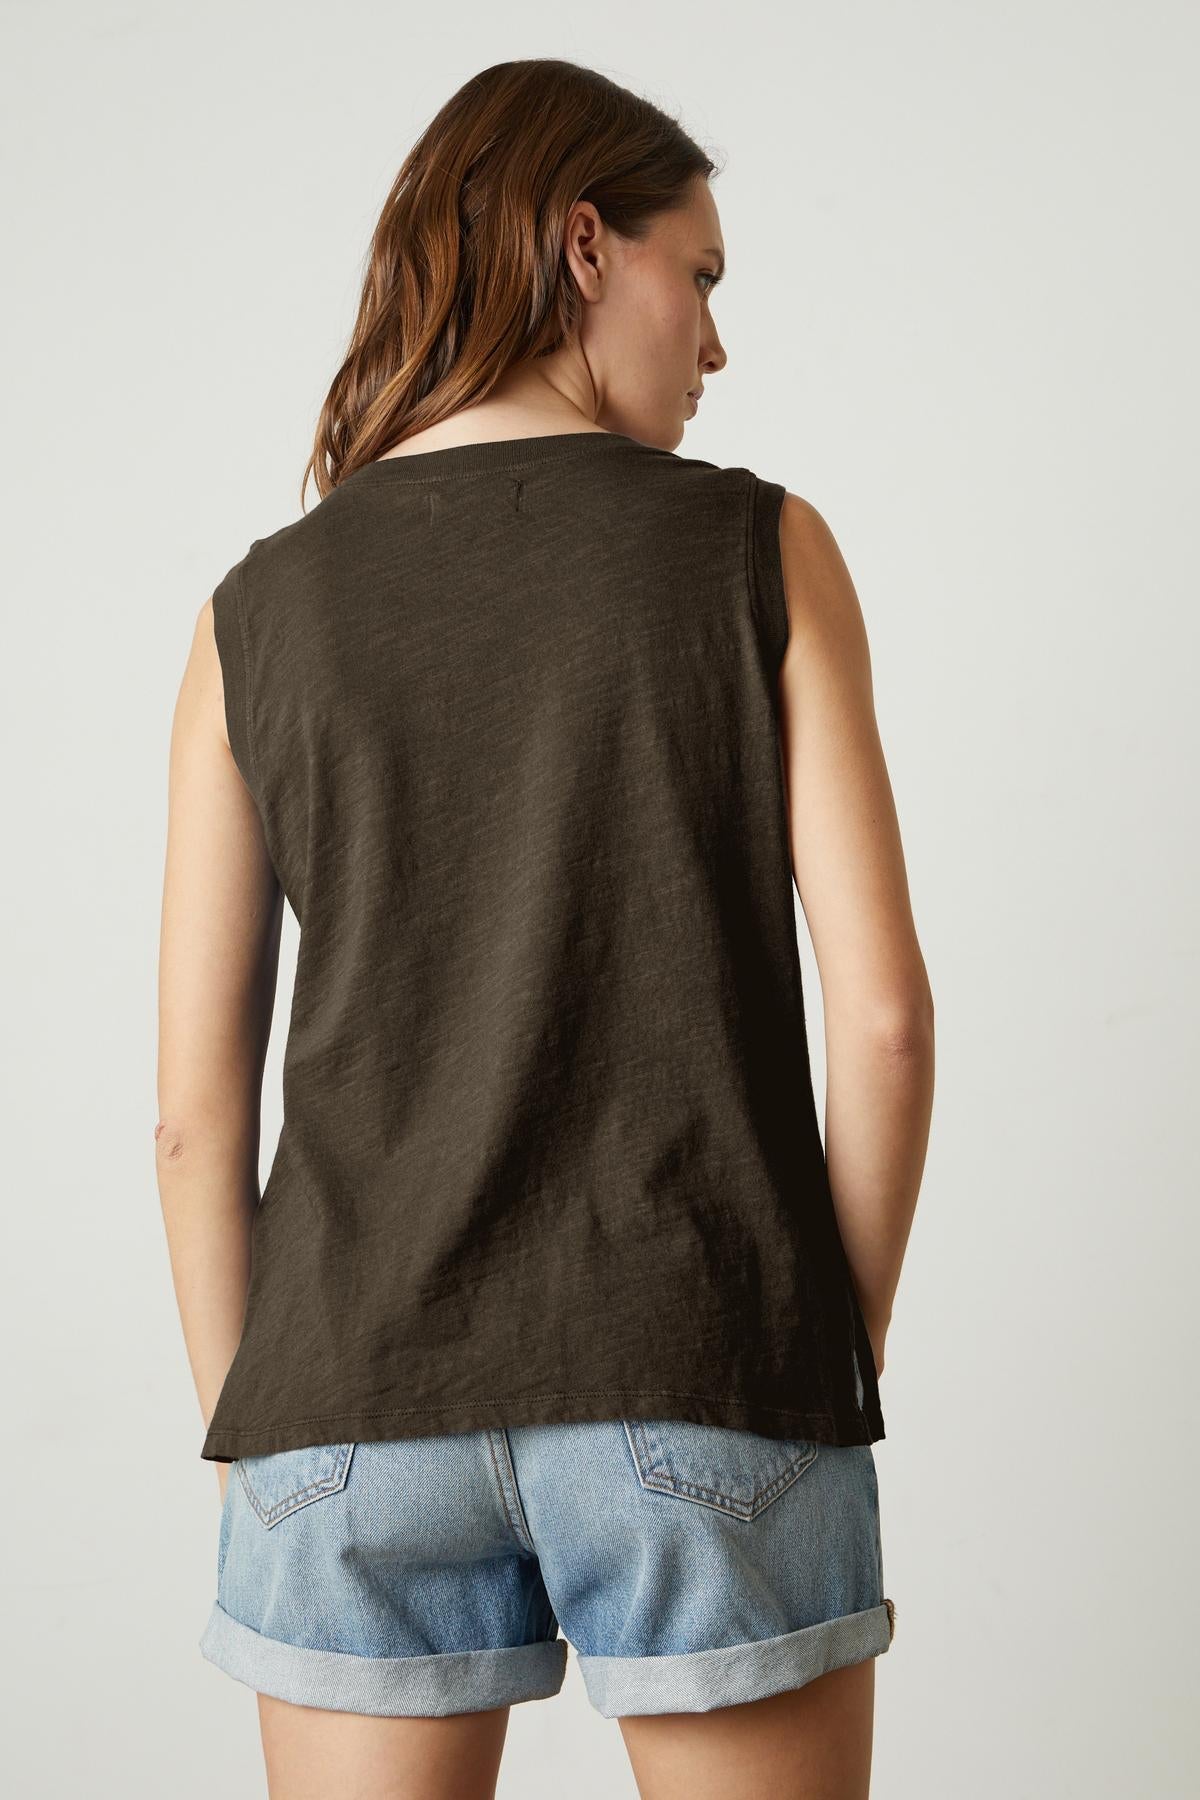 The back view of a woman wearing a Velvet by Graham & Spencer ELLEN VINTAGE SLUB TANK TOP and denim shorts.-35921120067777